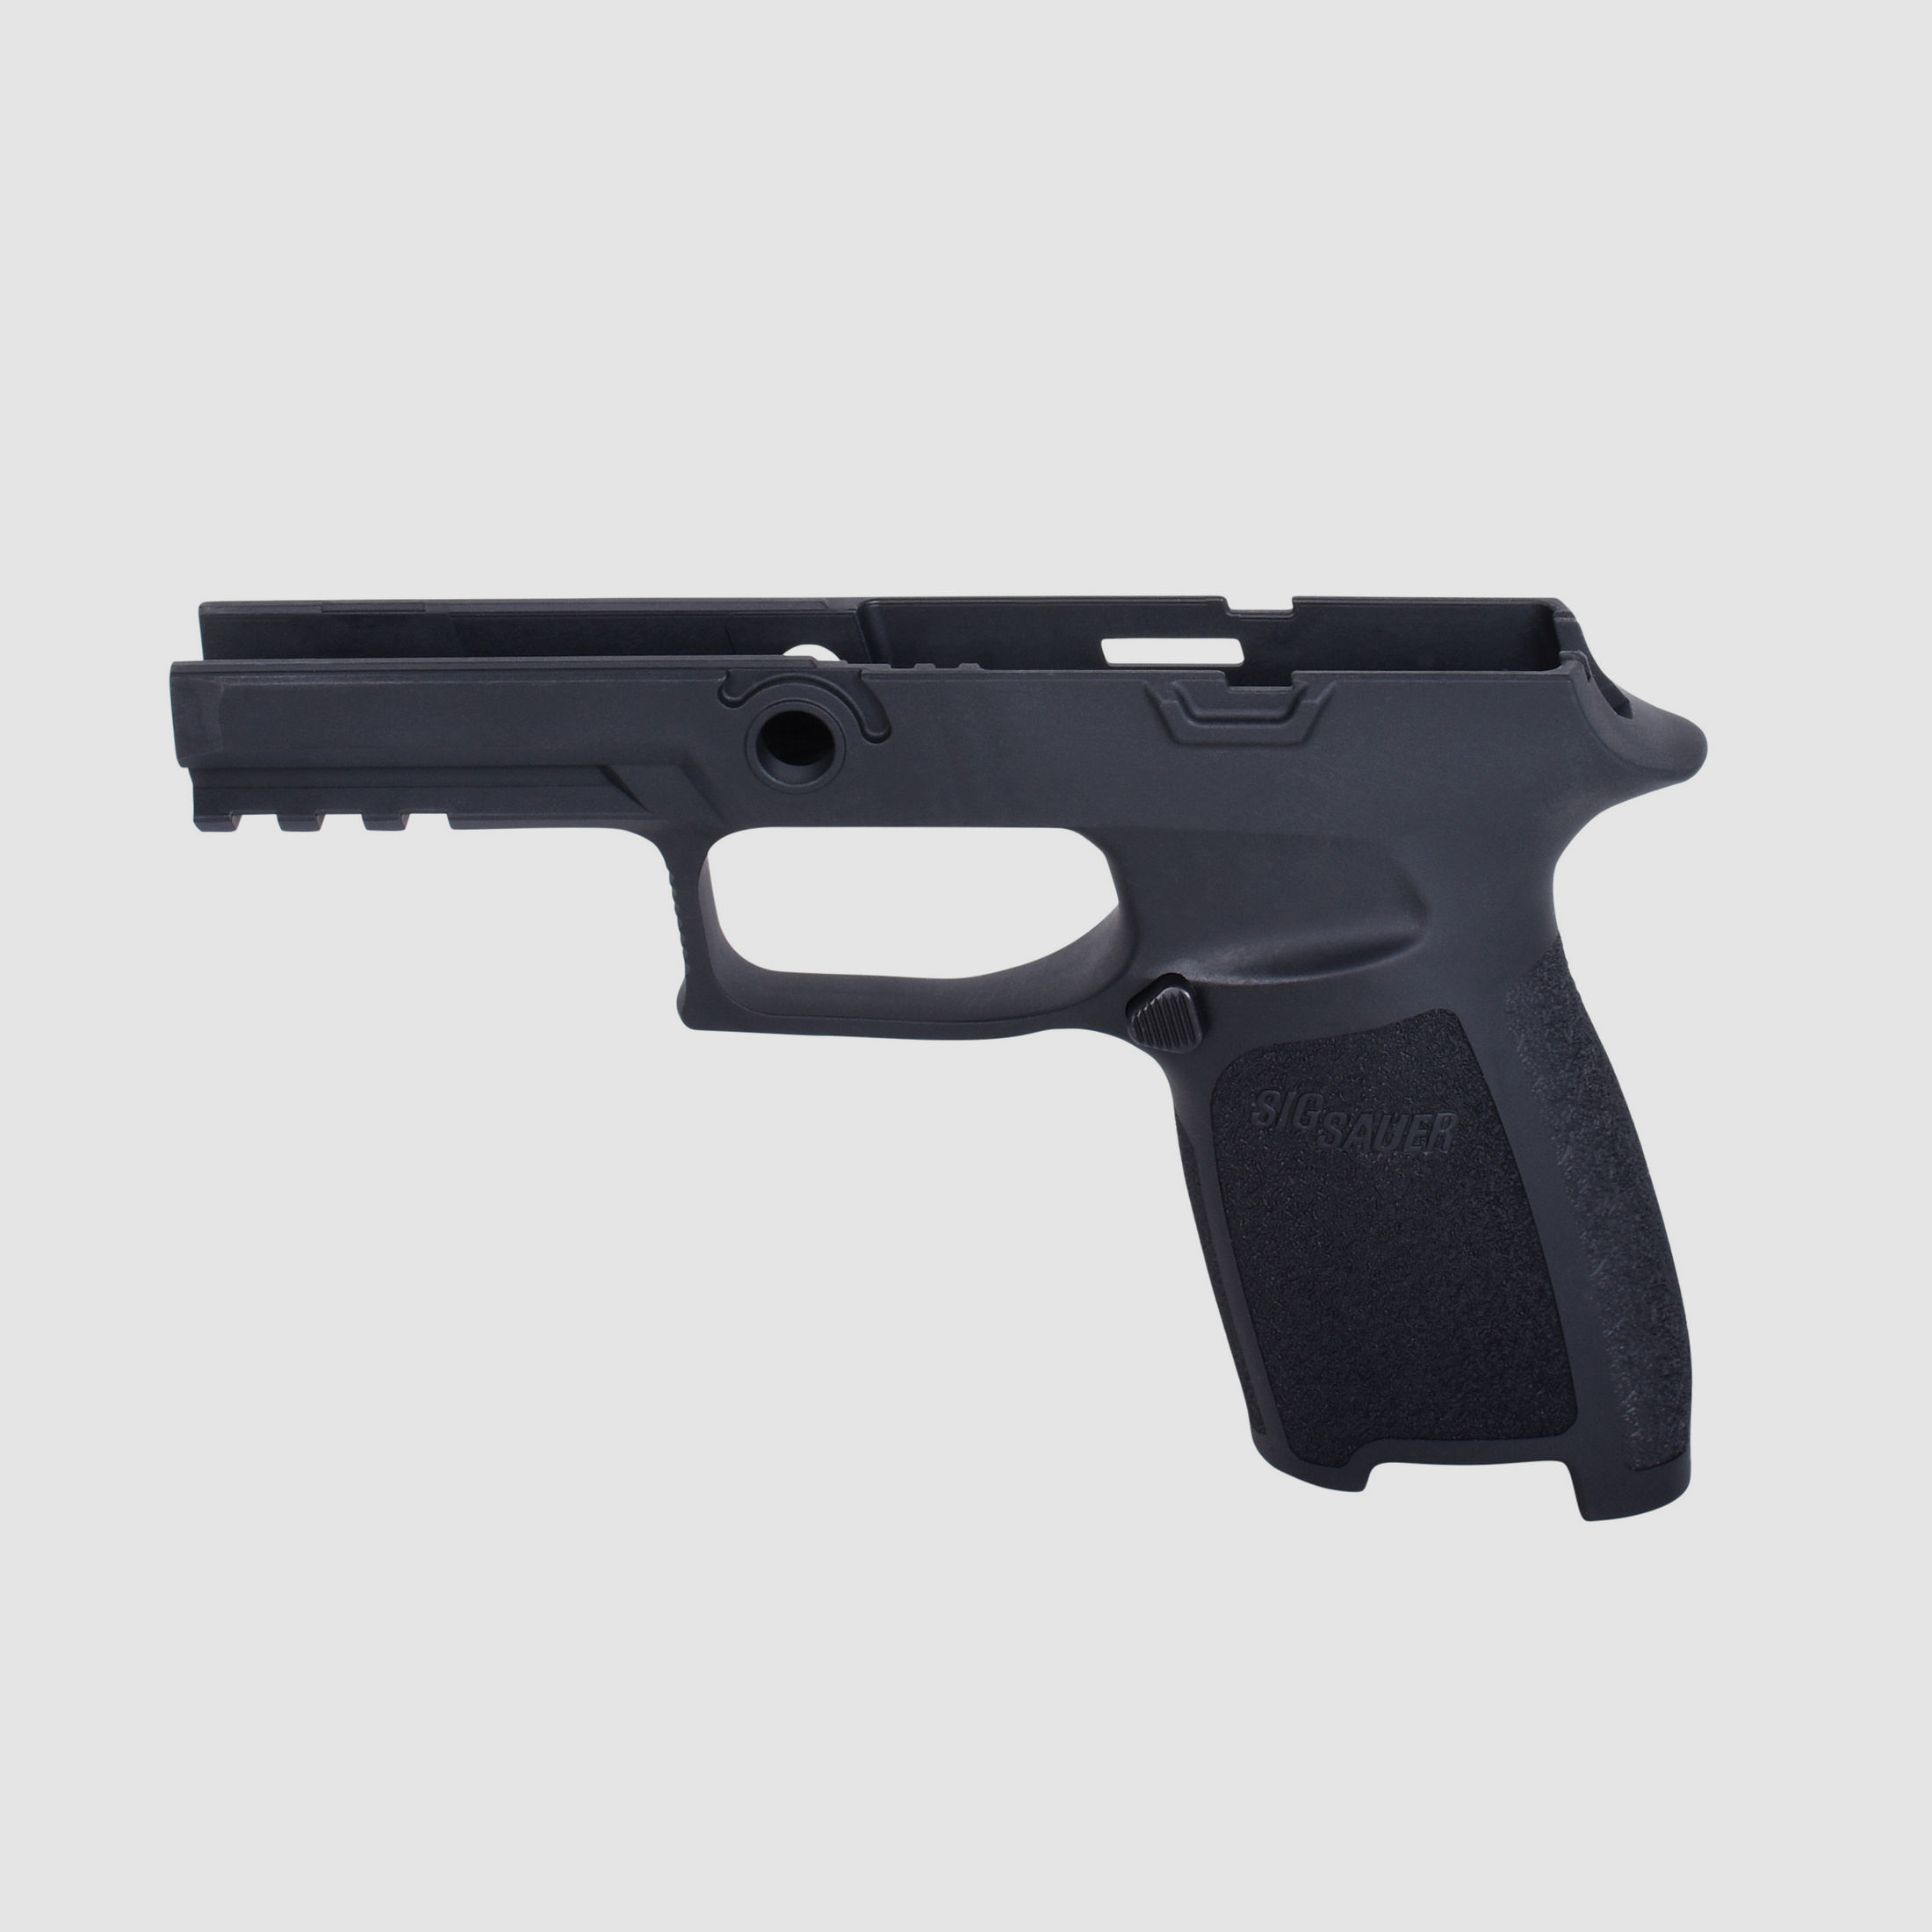 Griffmodul Sig Sauer P320 / P250 Carry Large | .357SIG / 9mm / .40S&W